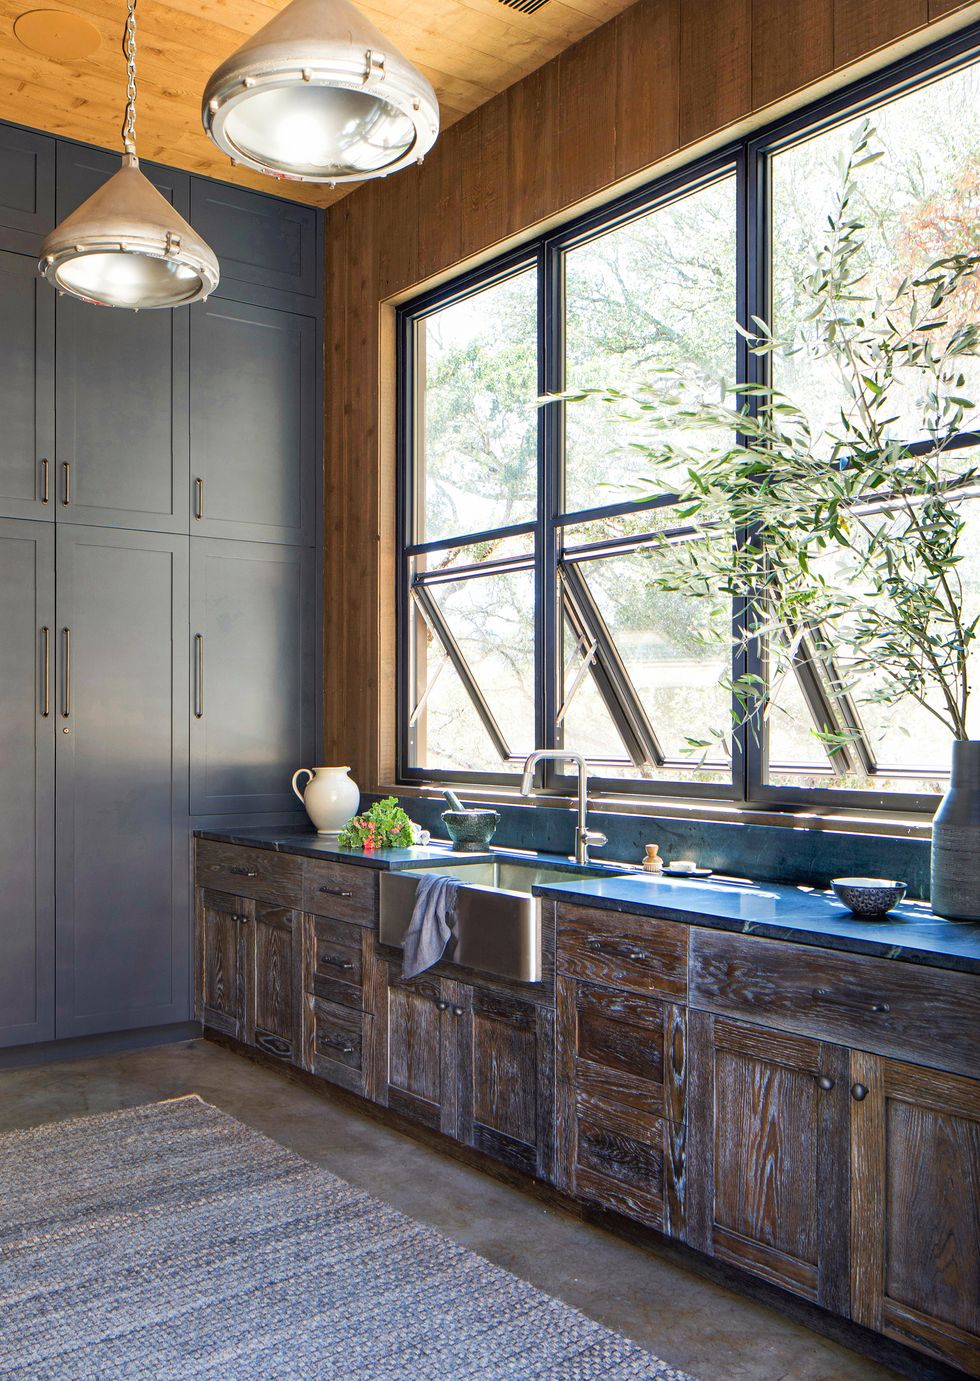 kitchen sink, wooden cabinets, and windows propped open